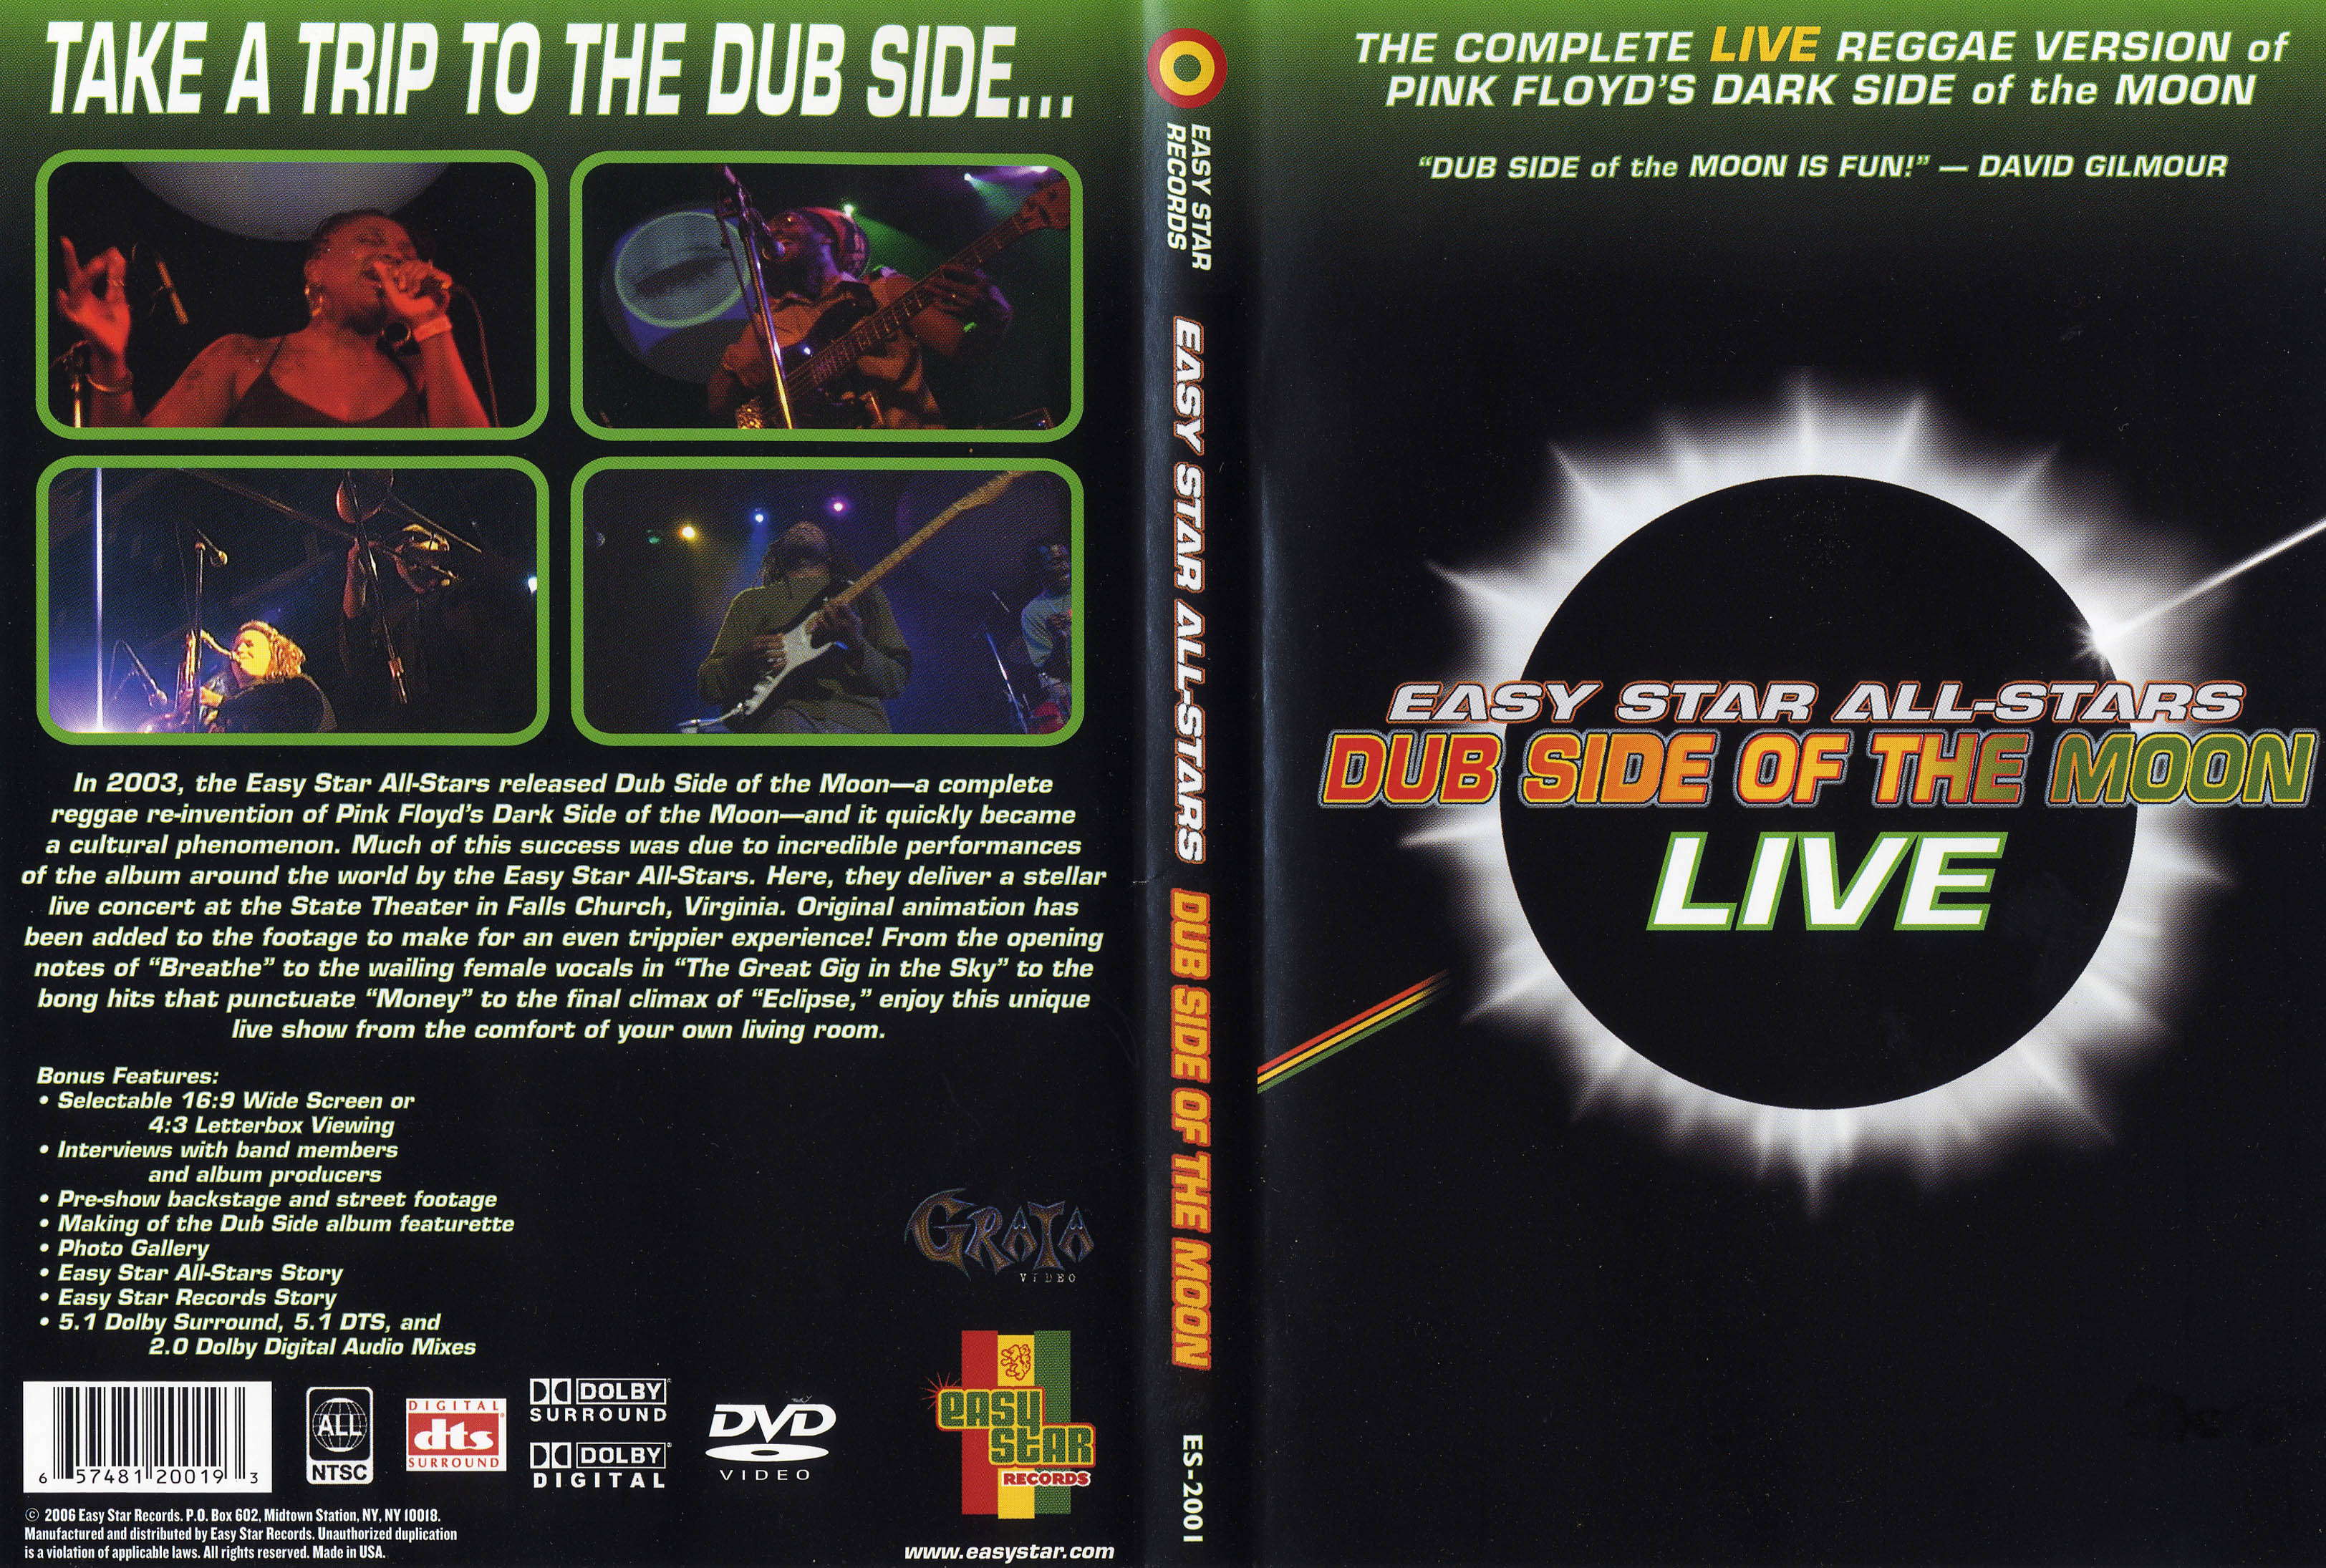 Jaquette DVD Dub side of the moon live